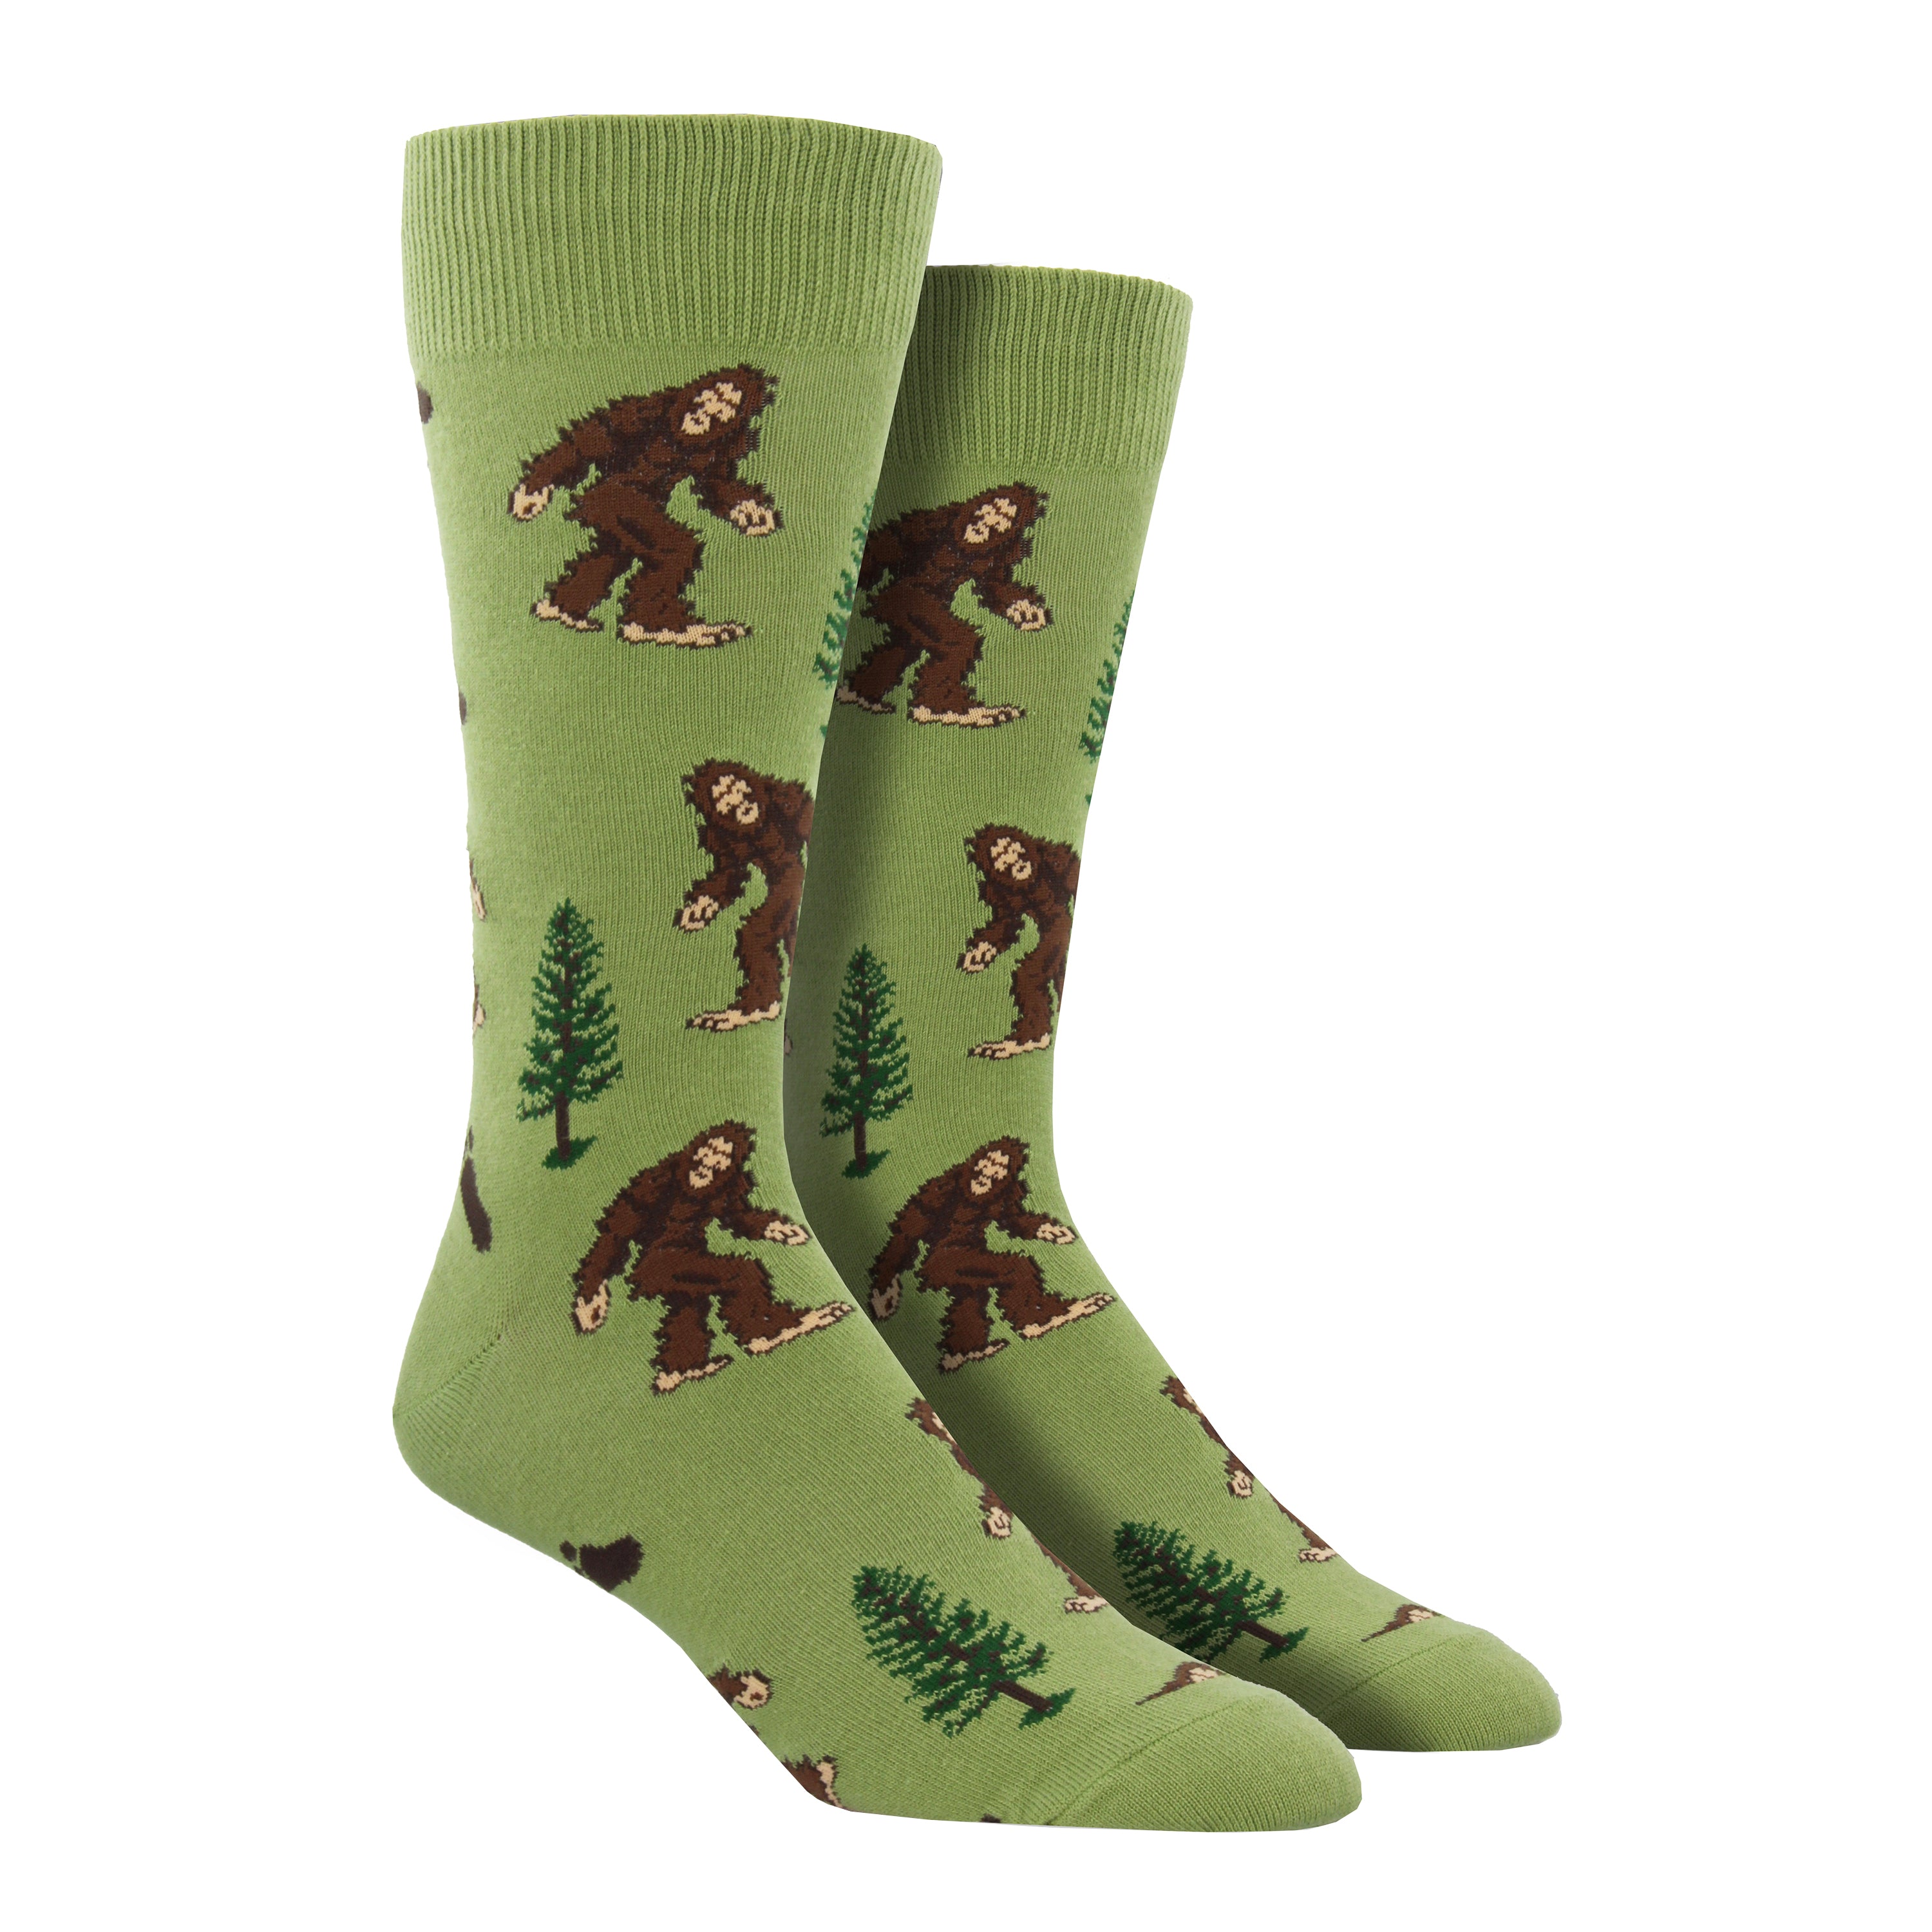 Shown on a leg form, a pair of Socksmith's light green cotton men’s crew socks with Bigfoot pattern